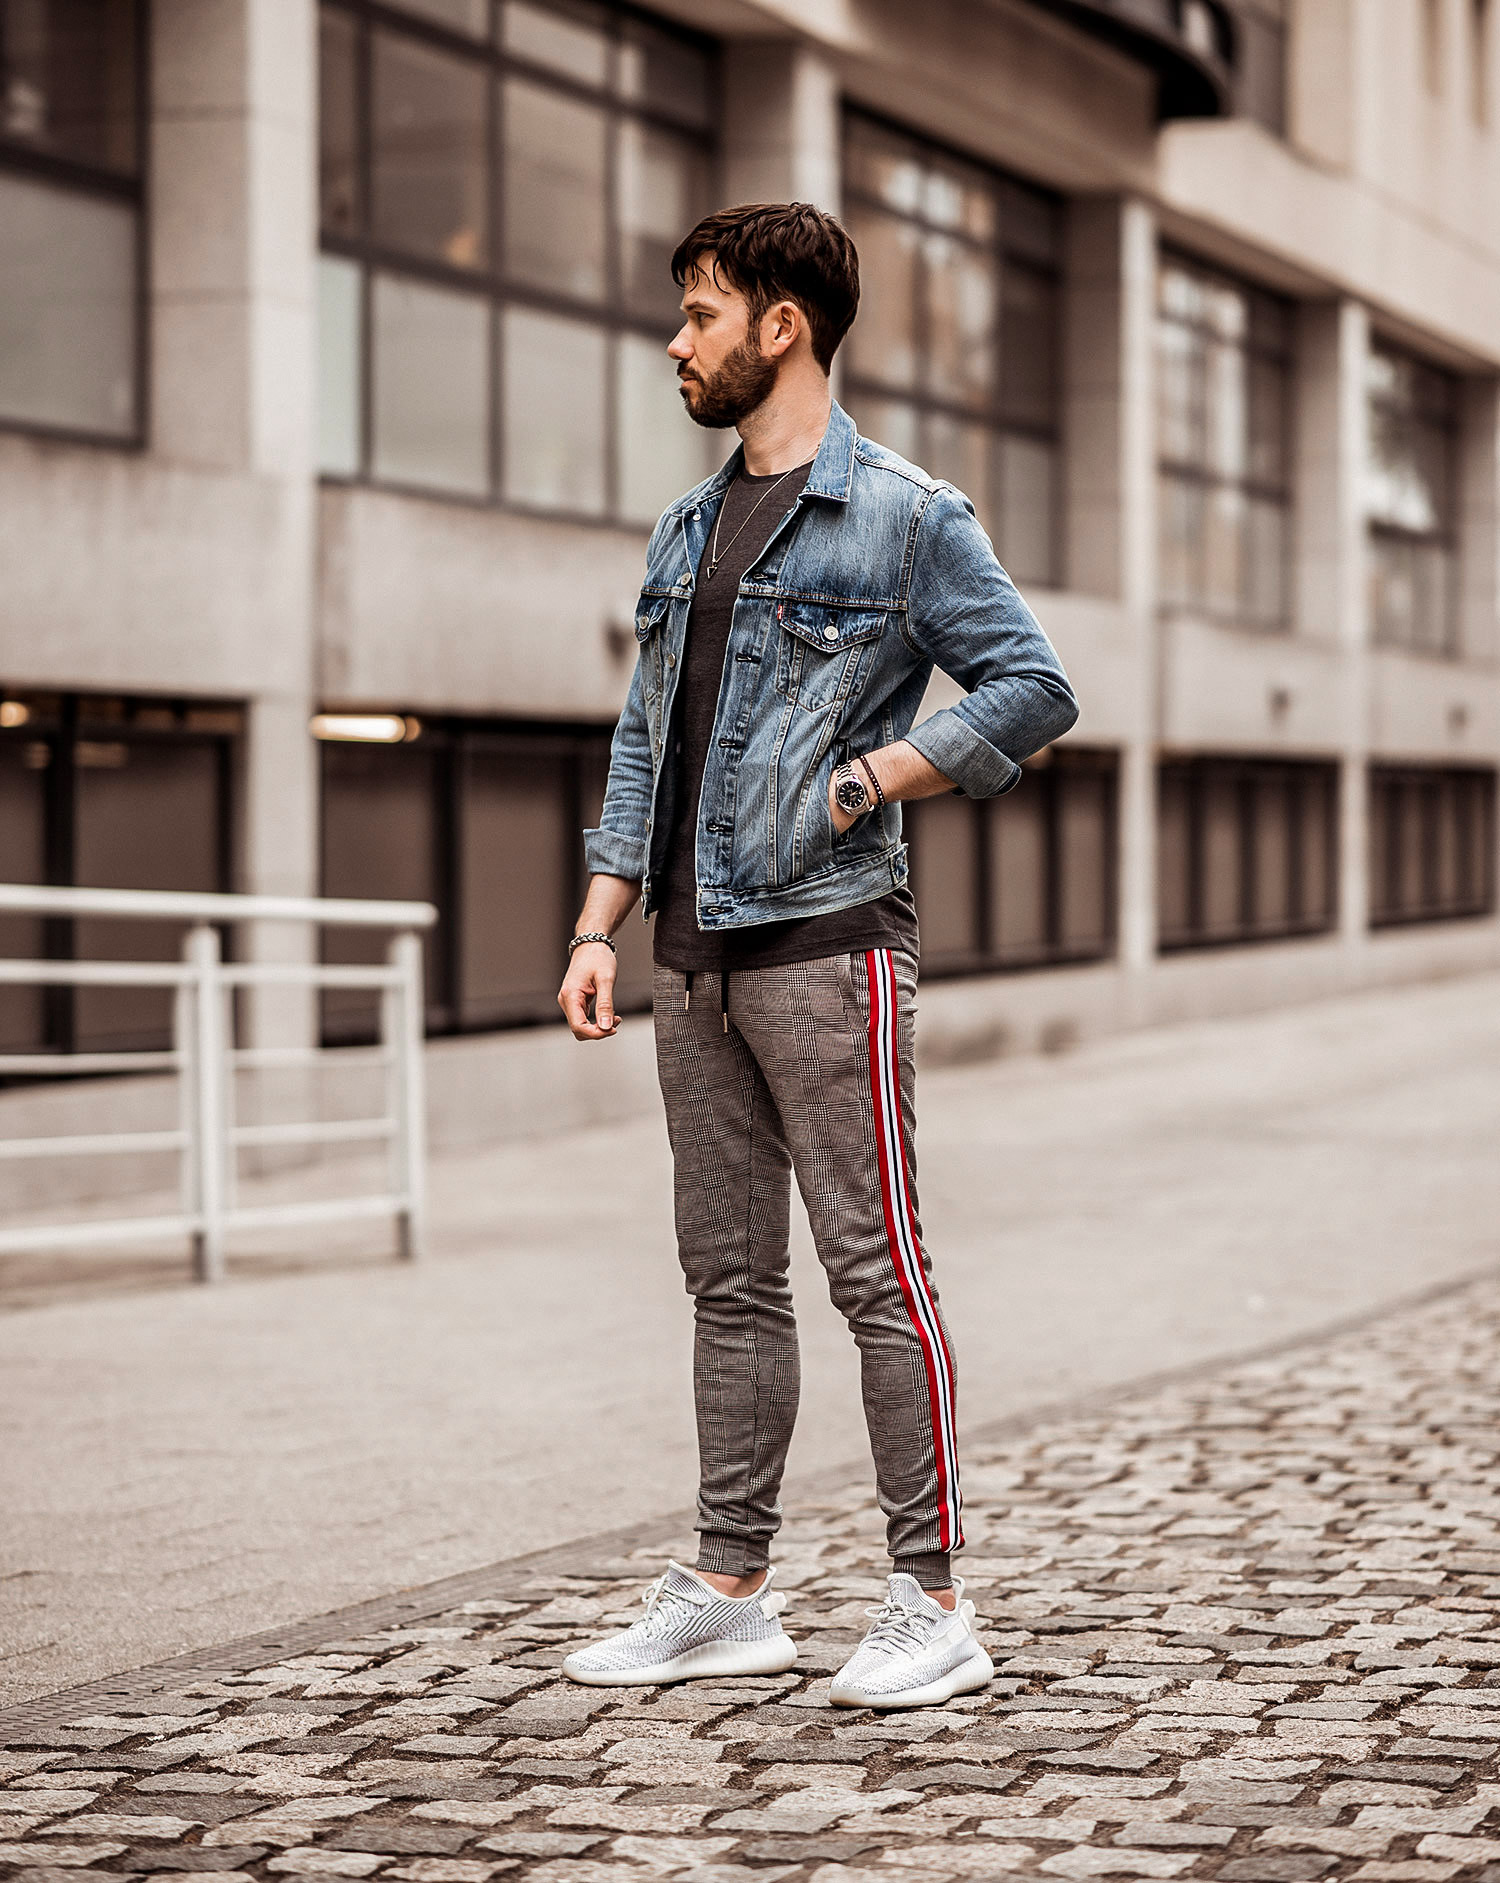 Grey Sweatpants with Denim Jacket Outfits For Men (21 ideas